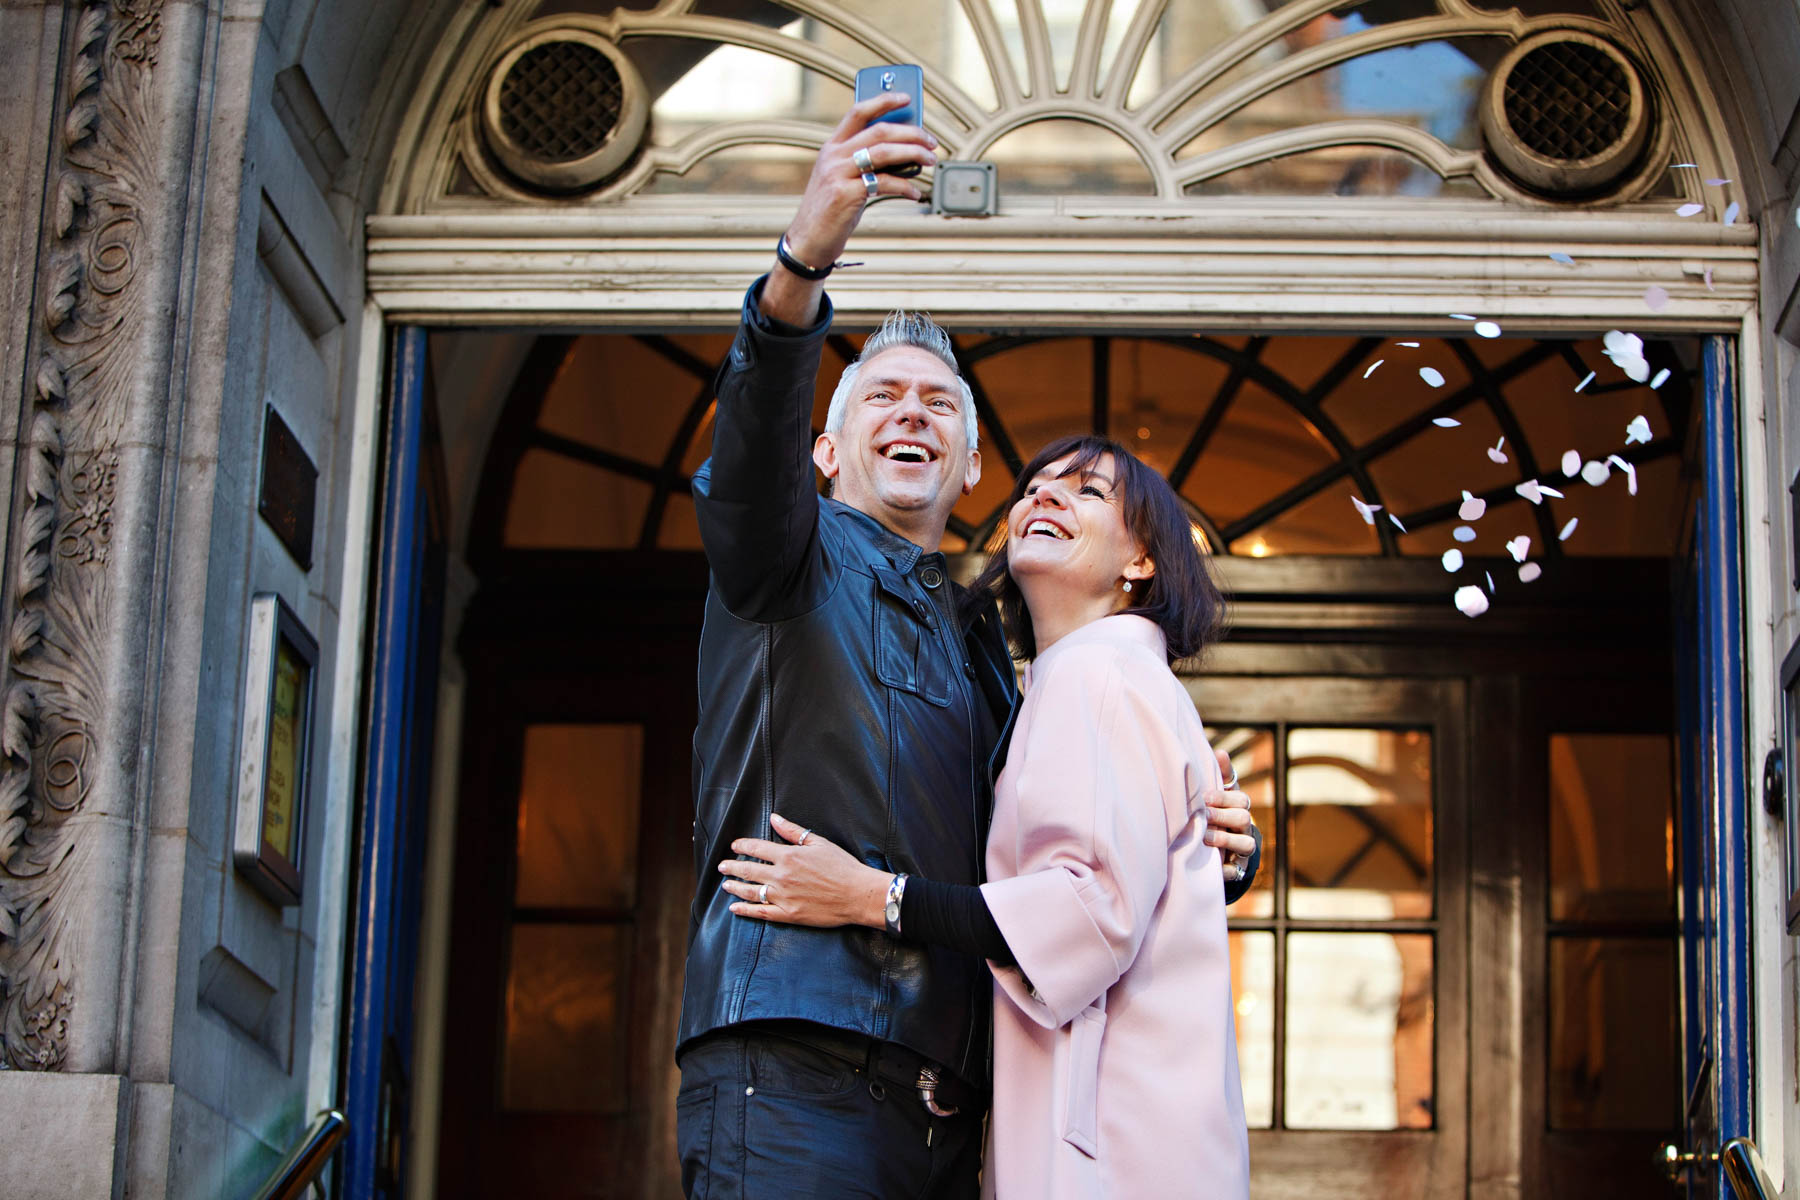 A bride in pink and groom in black leather jacket take selfies as they throw confetti at themselves after their elopement wedding ceremony in the Rossetti Room.